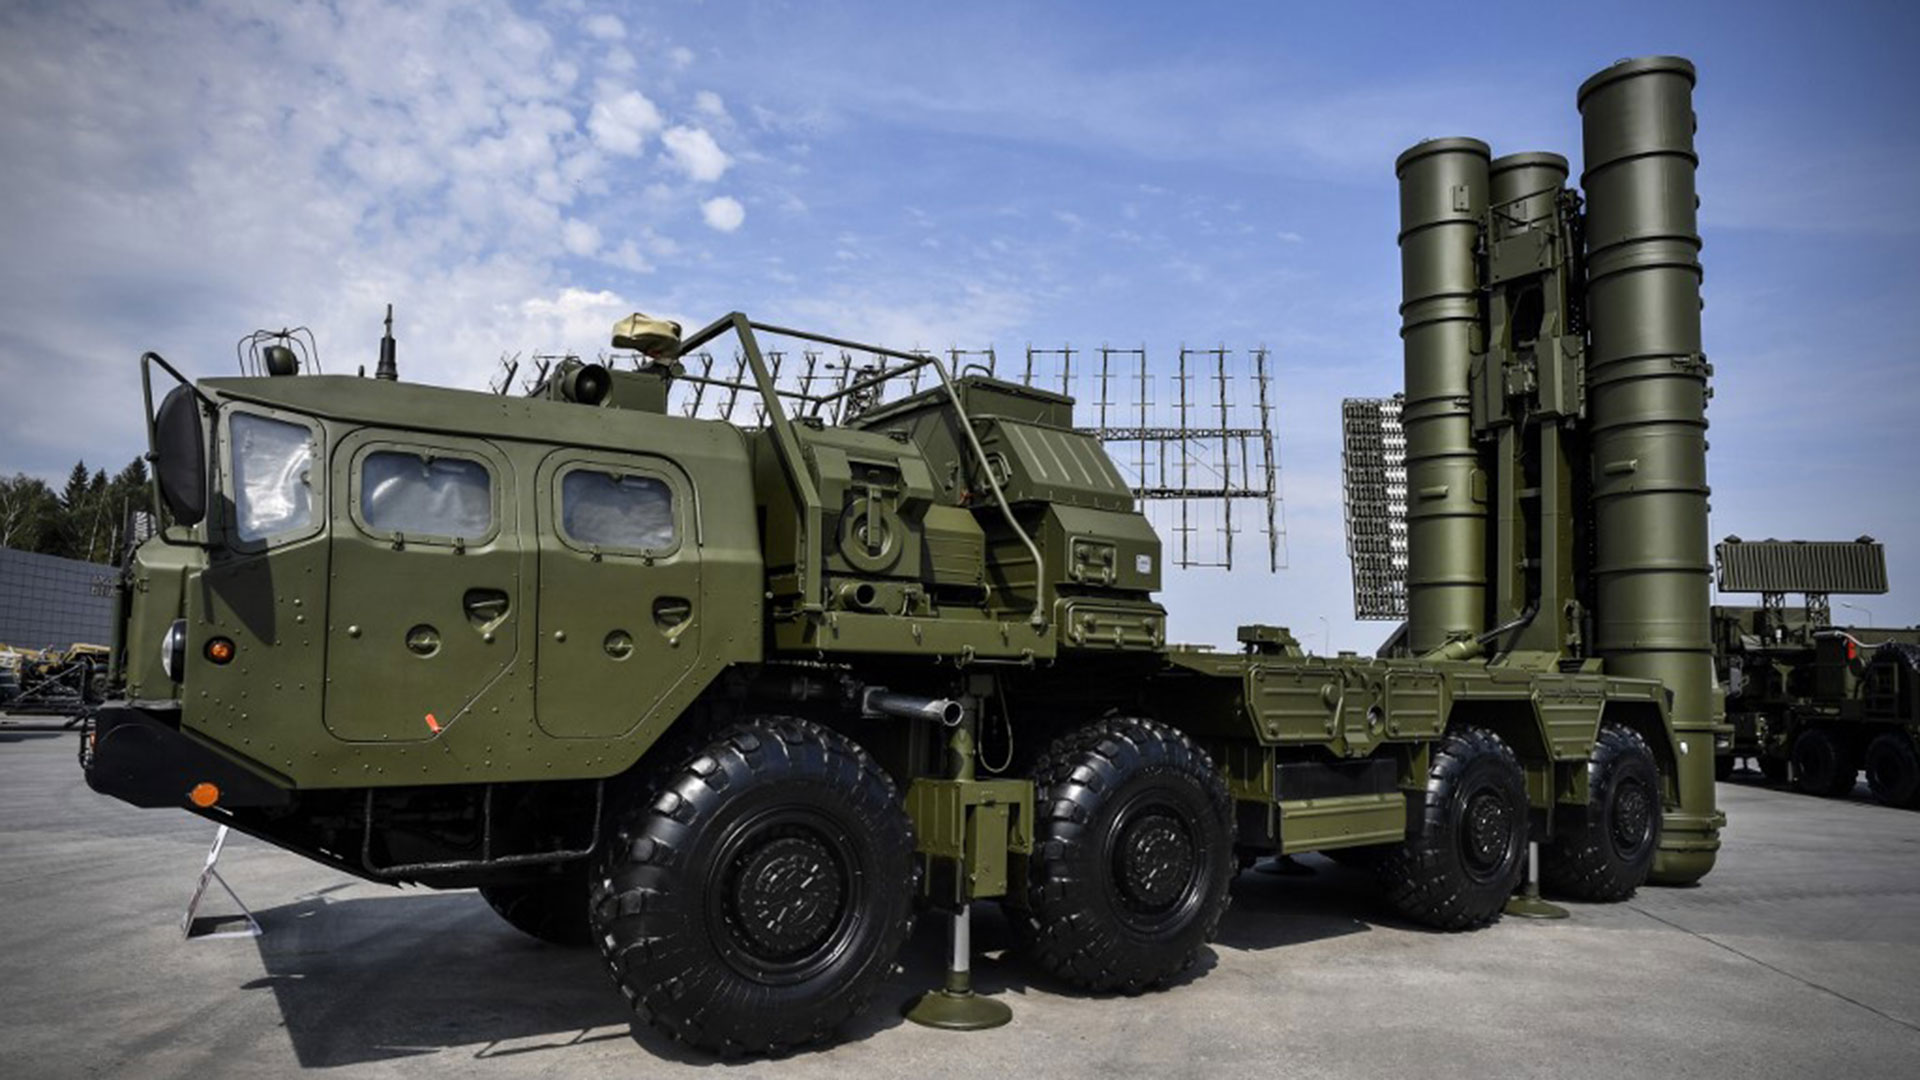 The Russian S-400 anti-aircraft missile launch system that Turkey bought (Photo by Alexander NEMENOV / AFP)